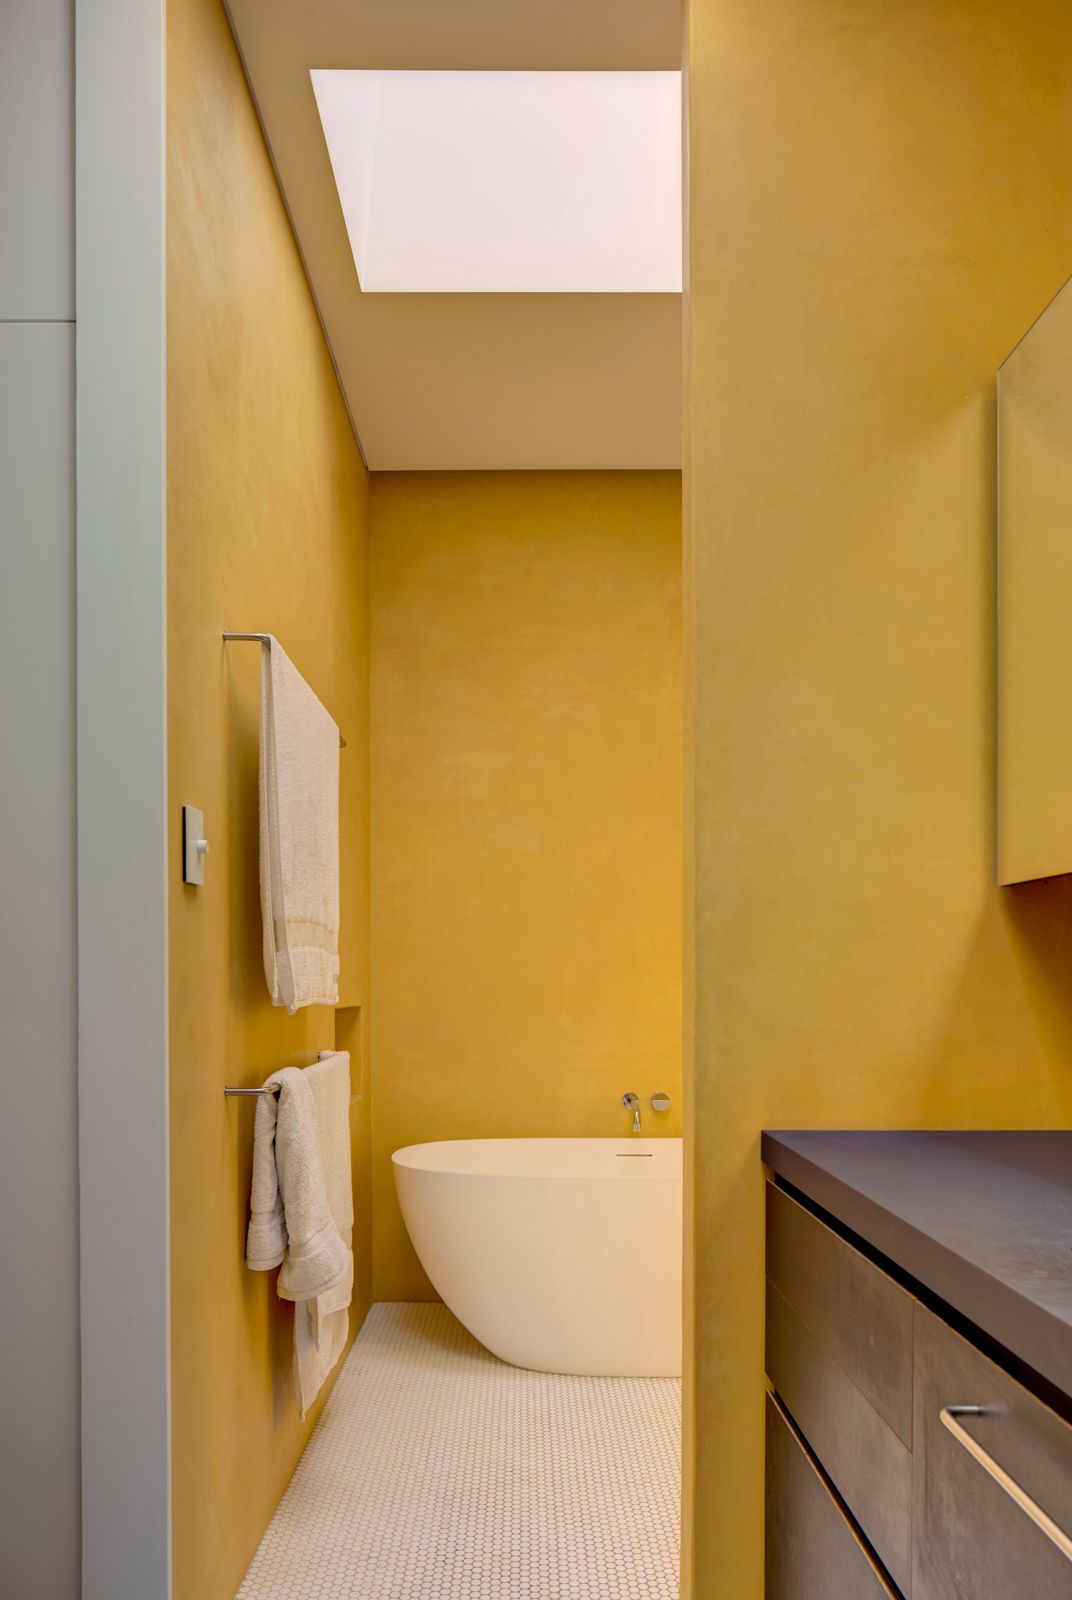 Sky House by Marra+Yeh Architects showing yellow bathroom with feature bath tub